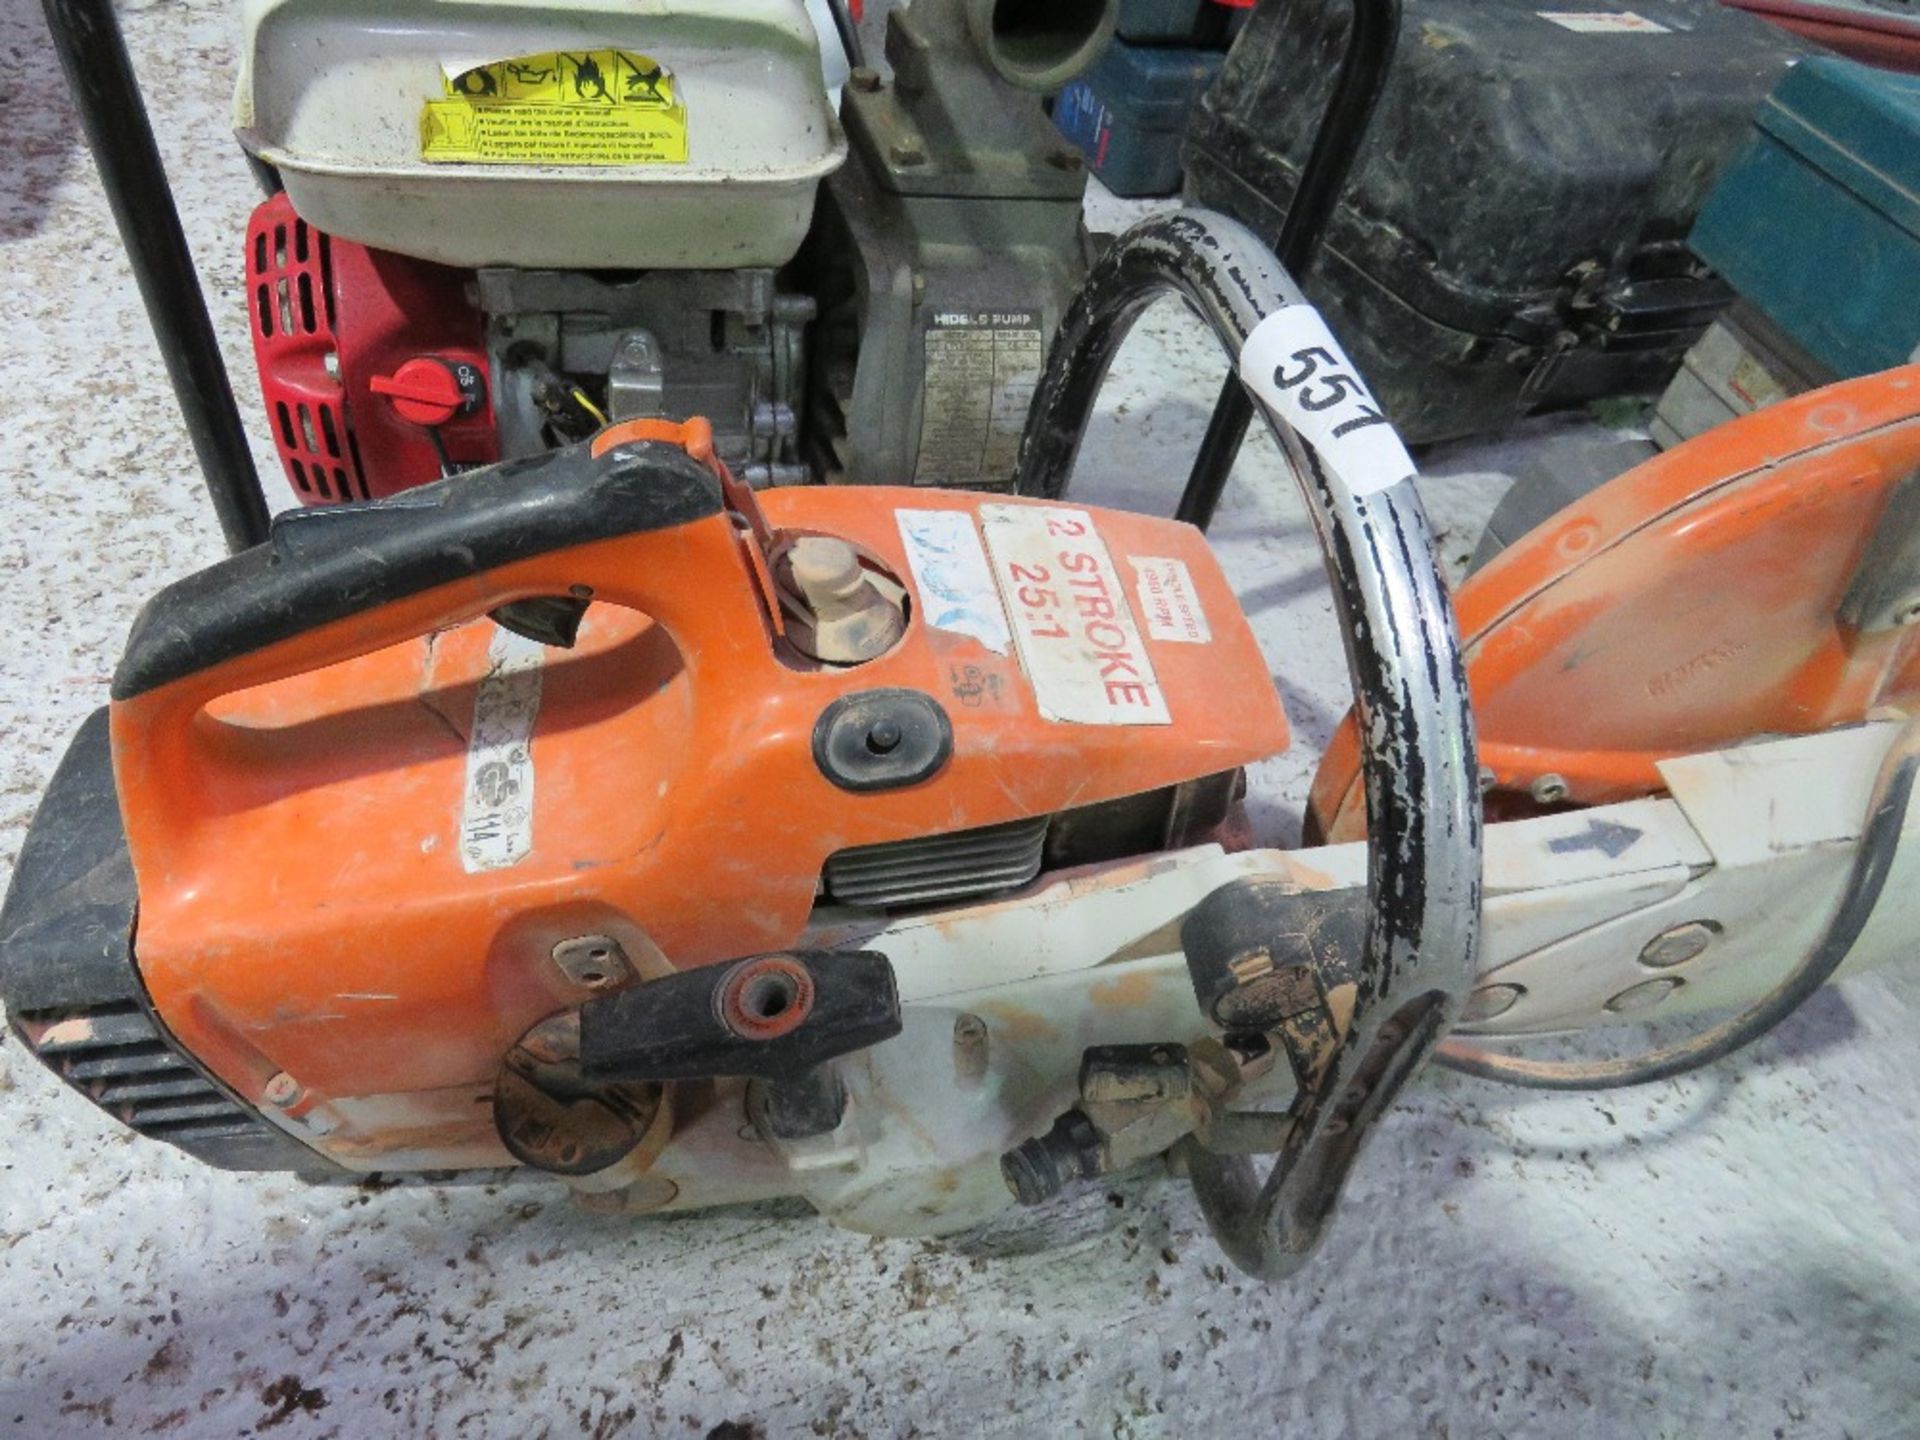 STIHL TS400 PETROL CUT OFF SAW. DIRECT FROM LOCAL RETIRING BUILDER. THIS LOT IS SOLD UNDER THE - Image 3 of 3